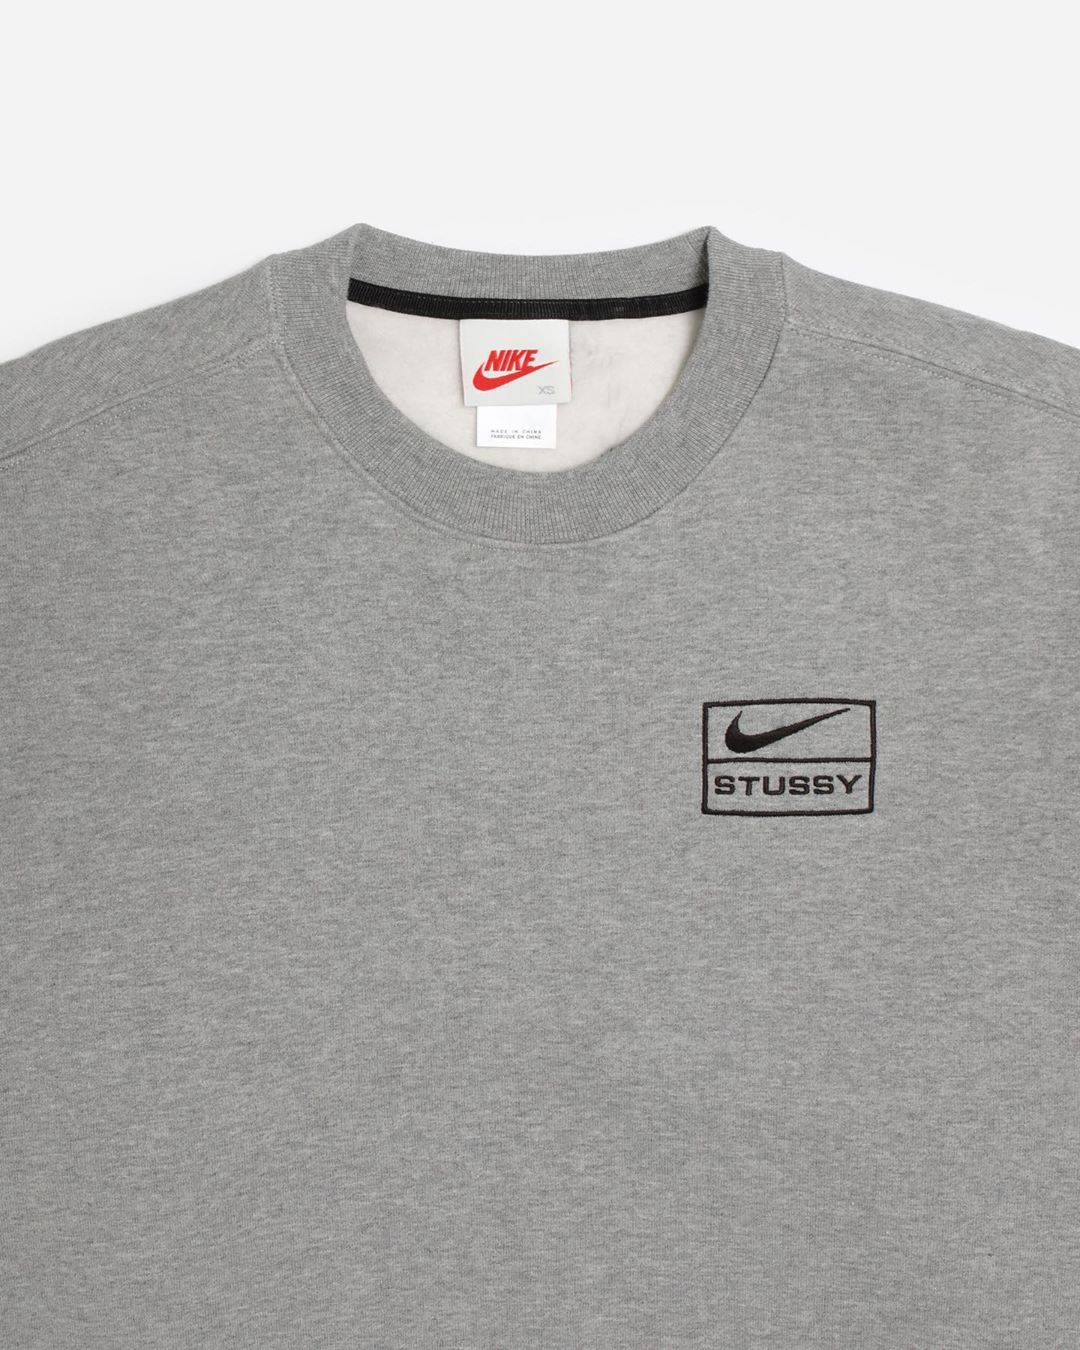 Take A Look At The Nike & Stussy Apparel Collaboration – PAUSE Online ...